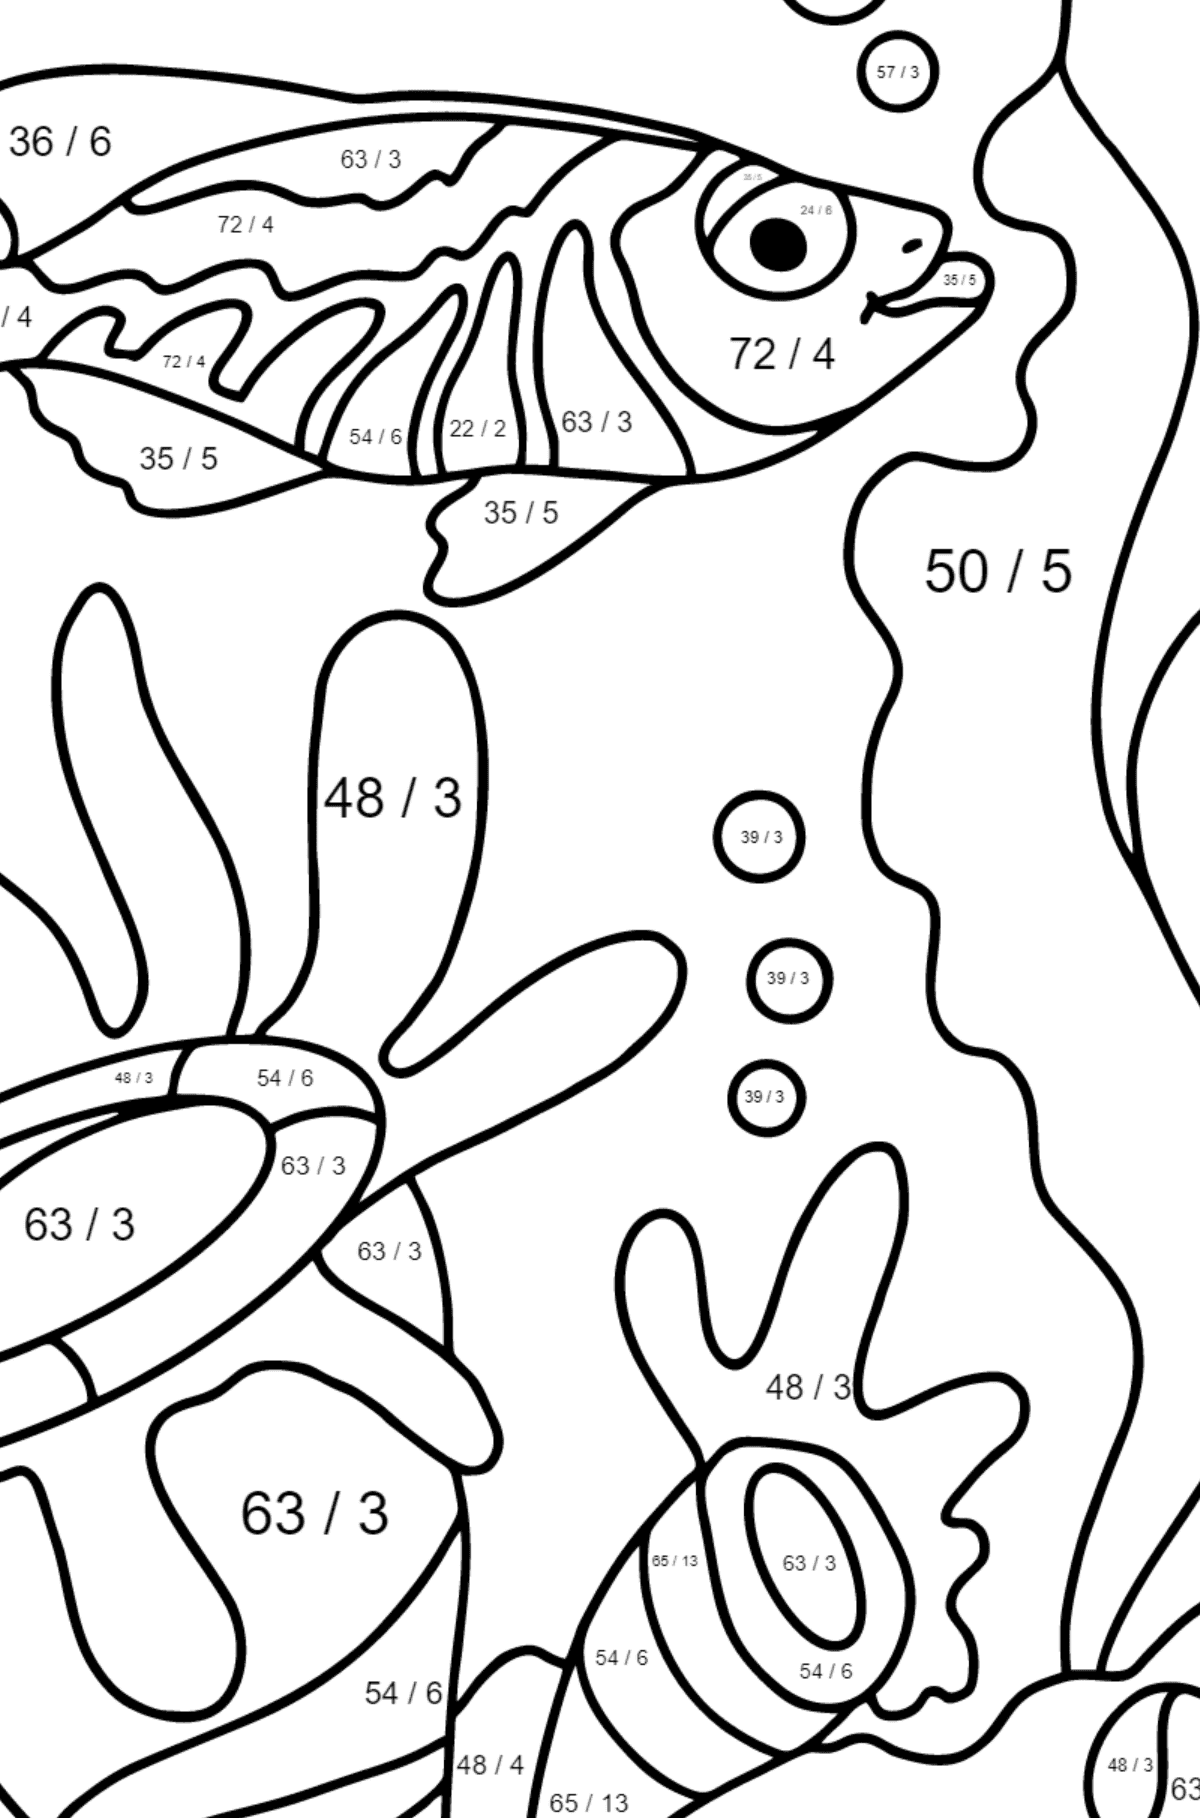 Coloring Page - A Fish is Swimming past the Corals - Math Coloring - Division for Children